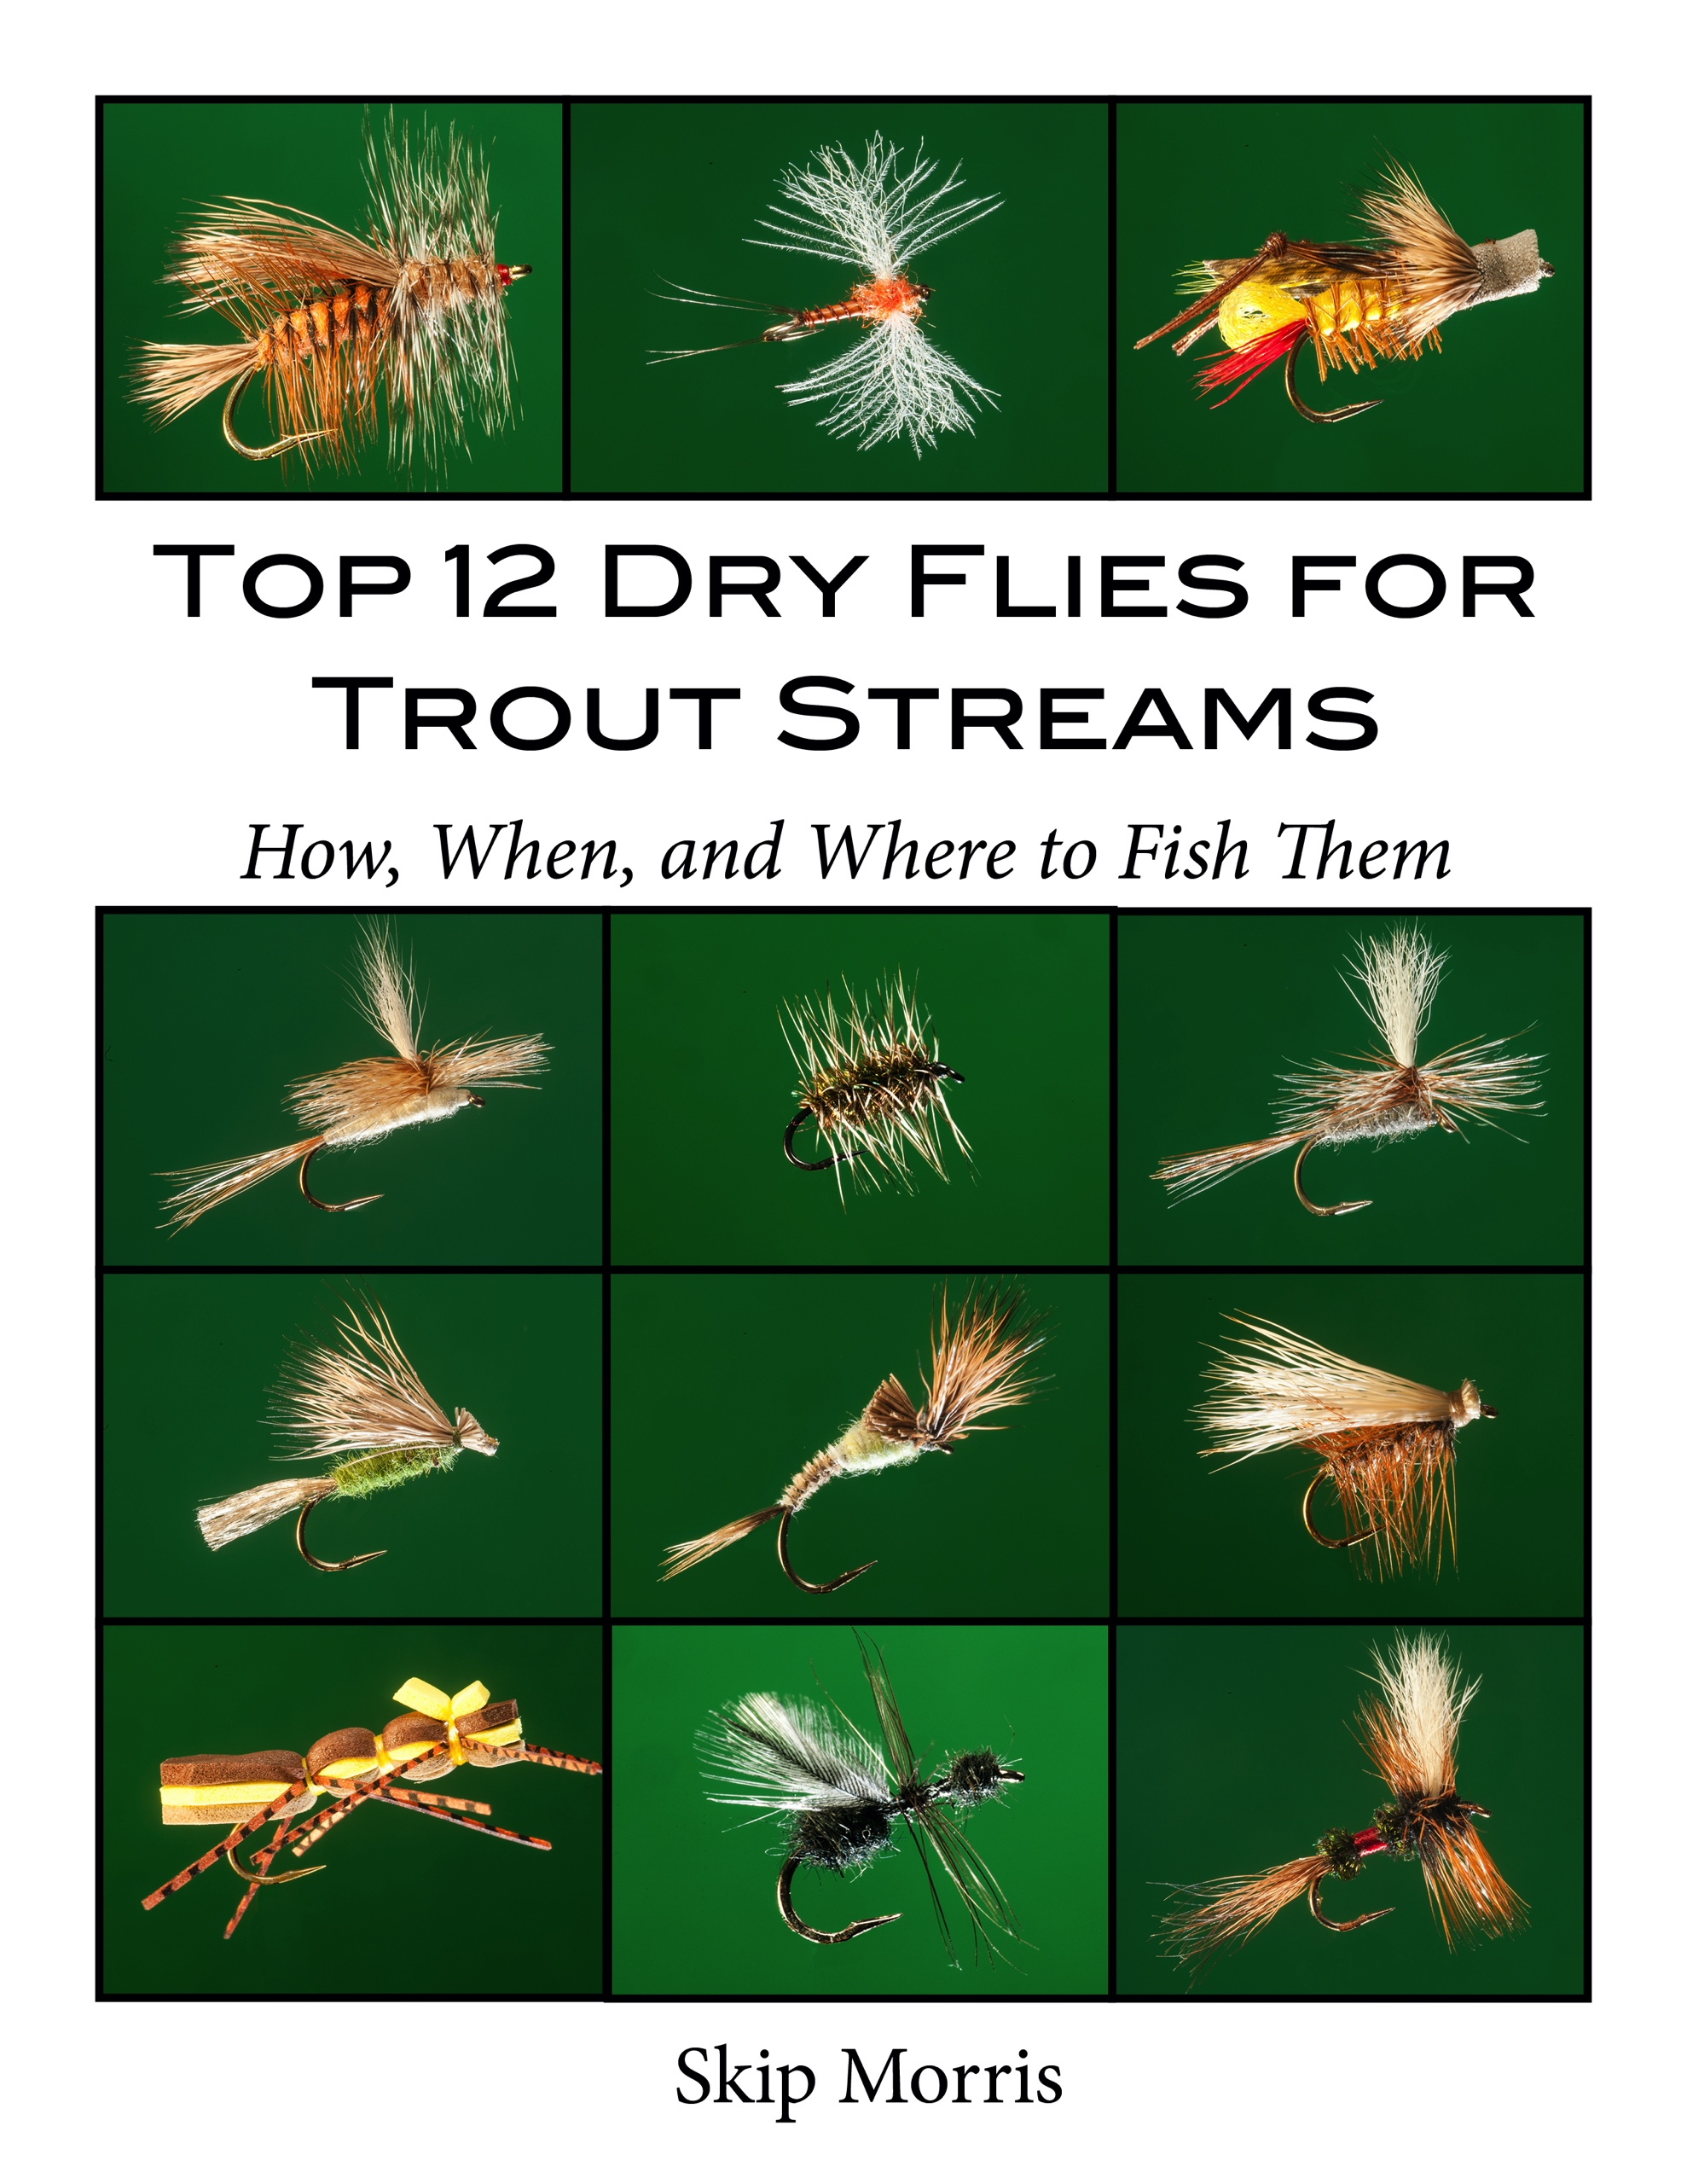 Skip Morris Books: Fly Tying and Fly Fishing Insights from a